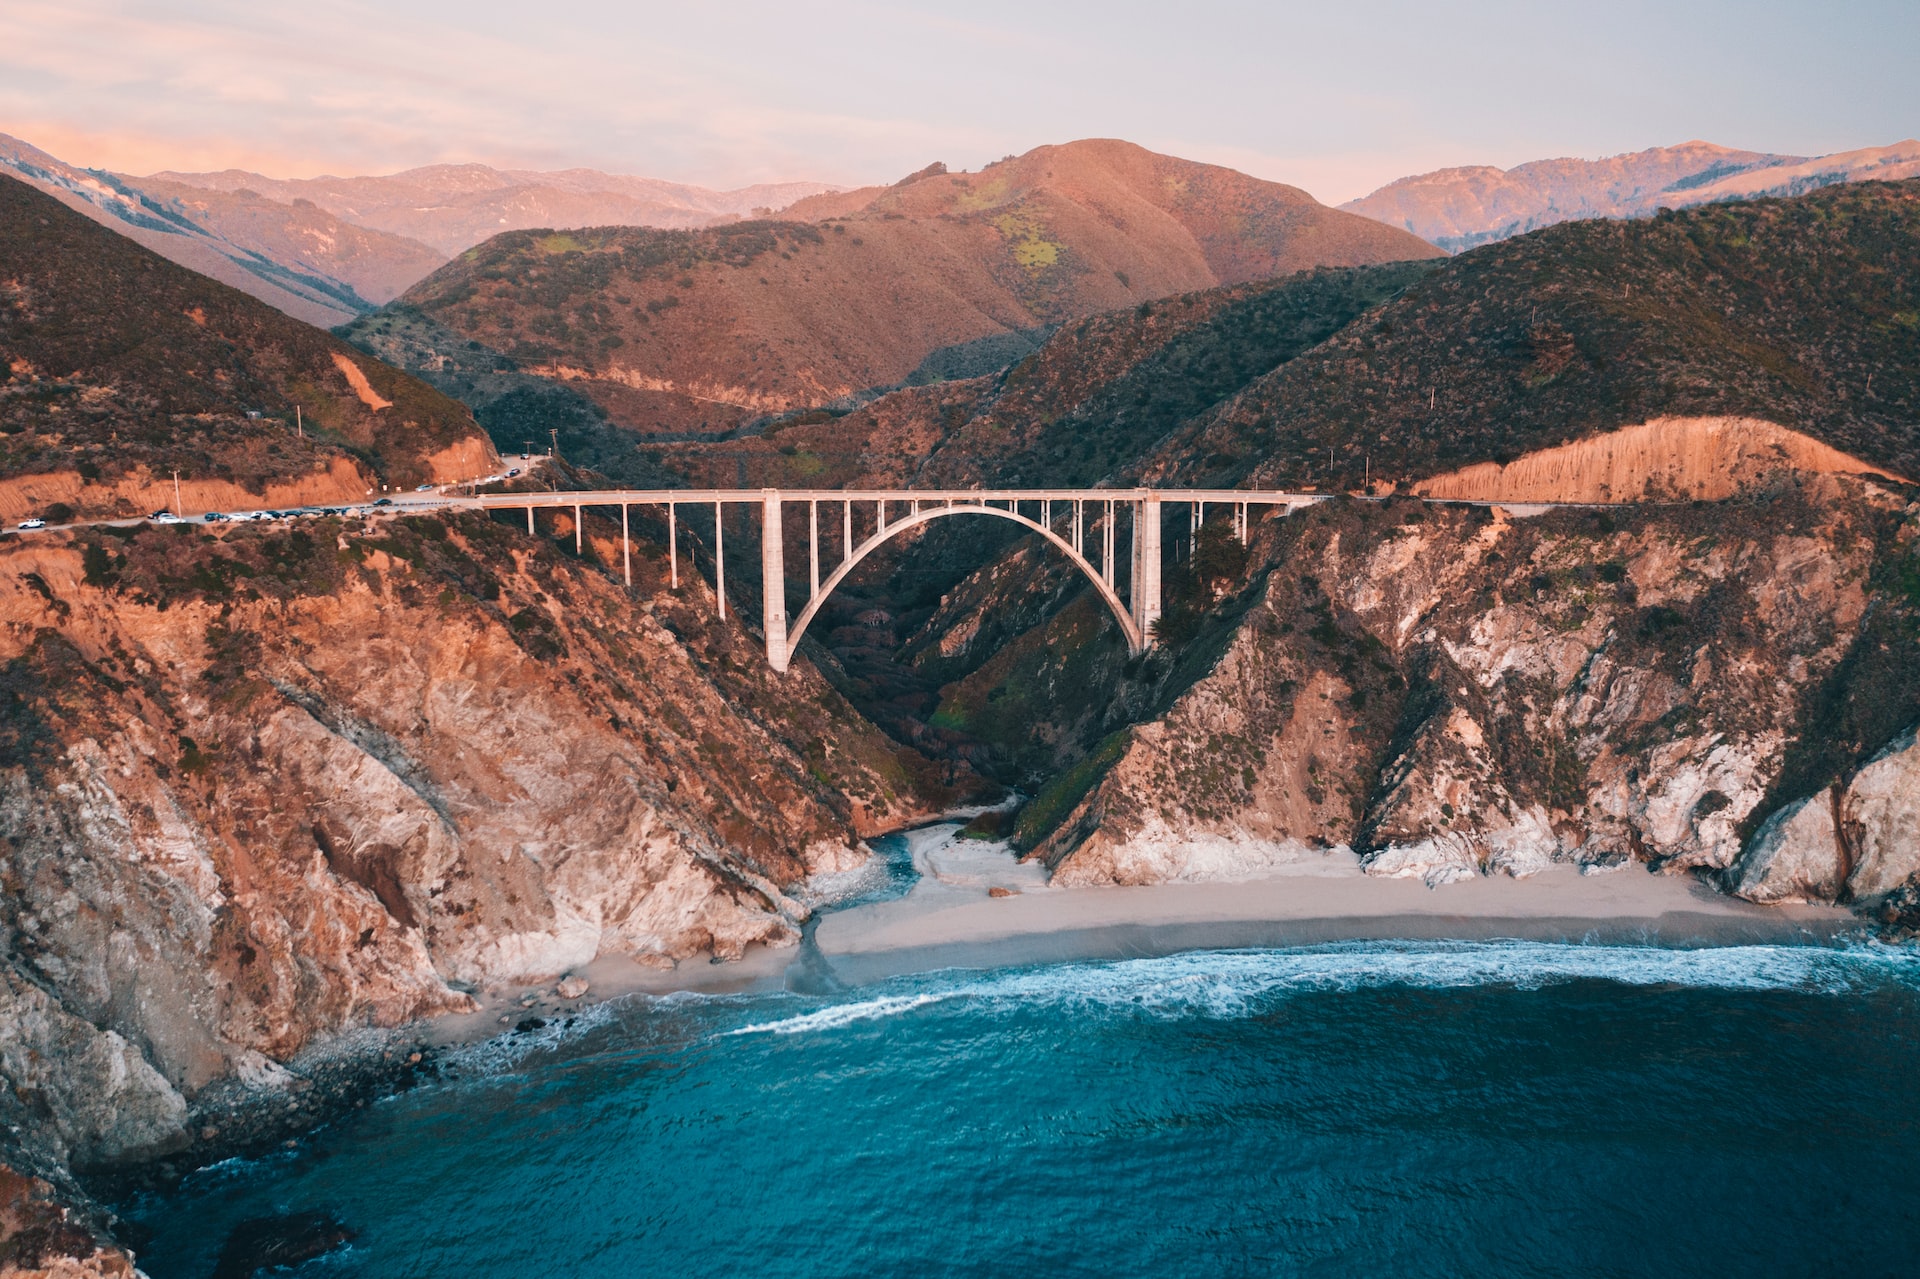 A picture of the iconic bridge in Big Sur.